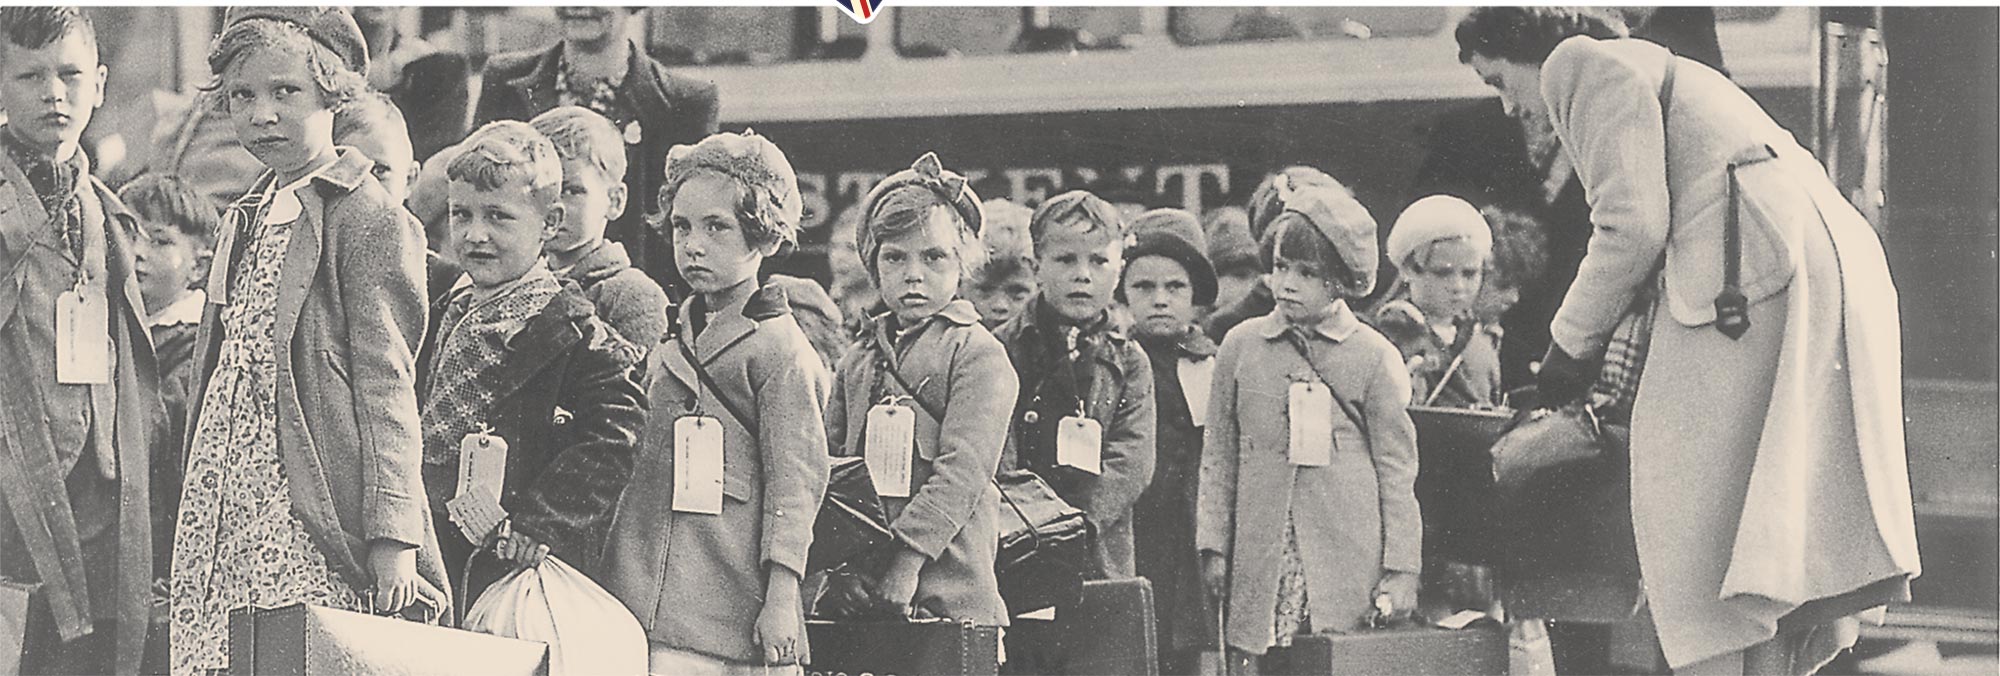 the great evacuation of children during the second world war, ww2